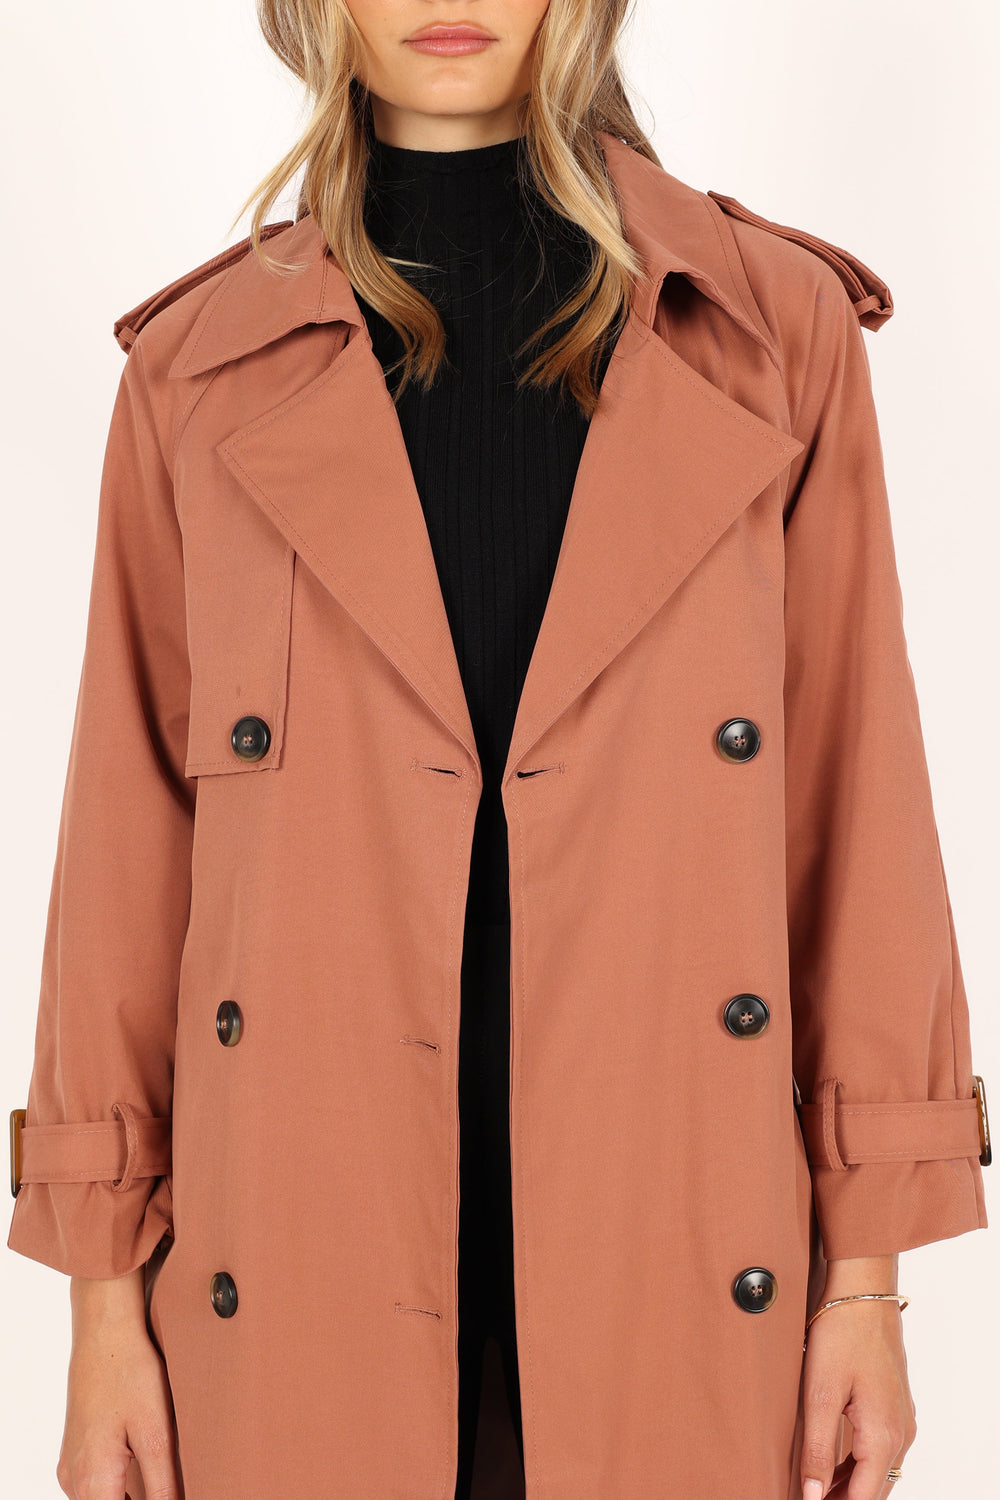 Petal and Pup USA Outerwear Trina Button Front Trench Coat - Rust